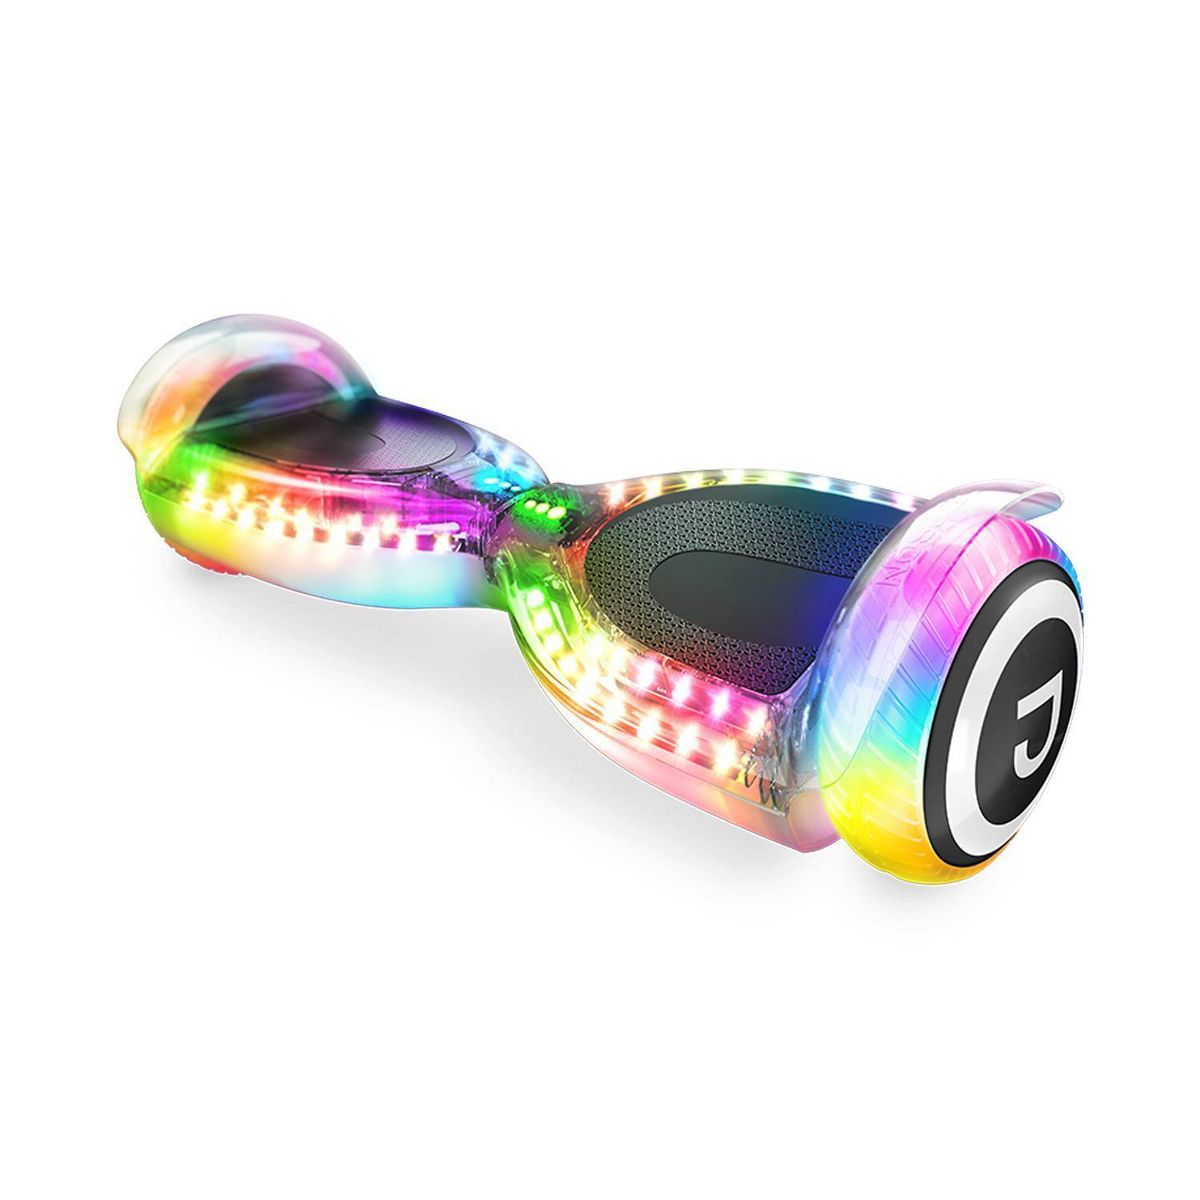 Jetson Pixel Hoverboard - White | Target